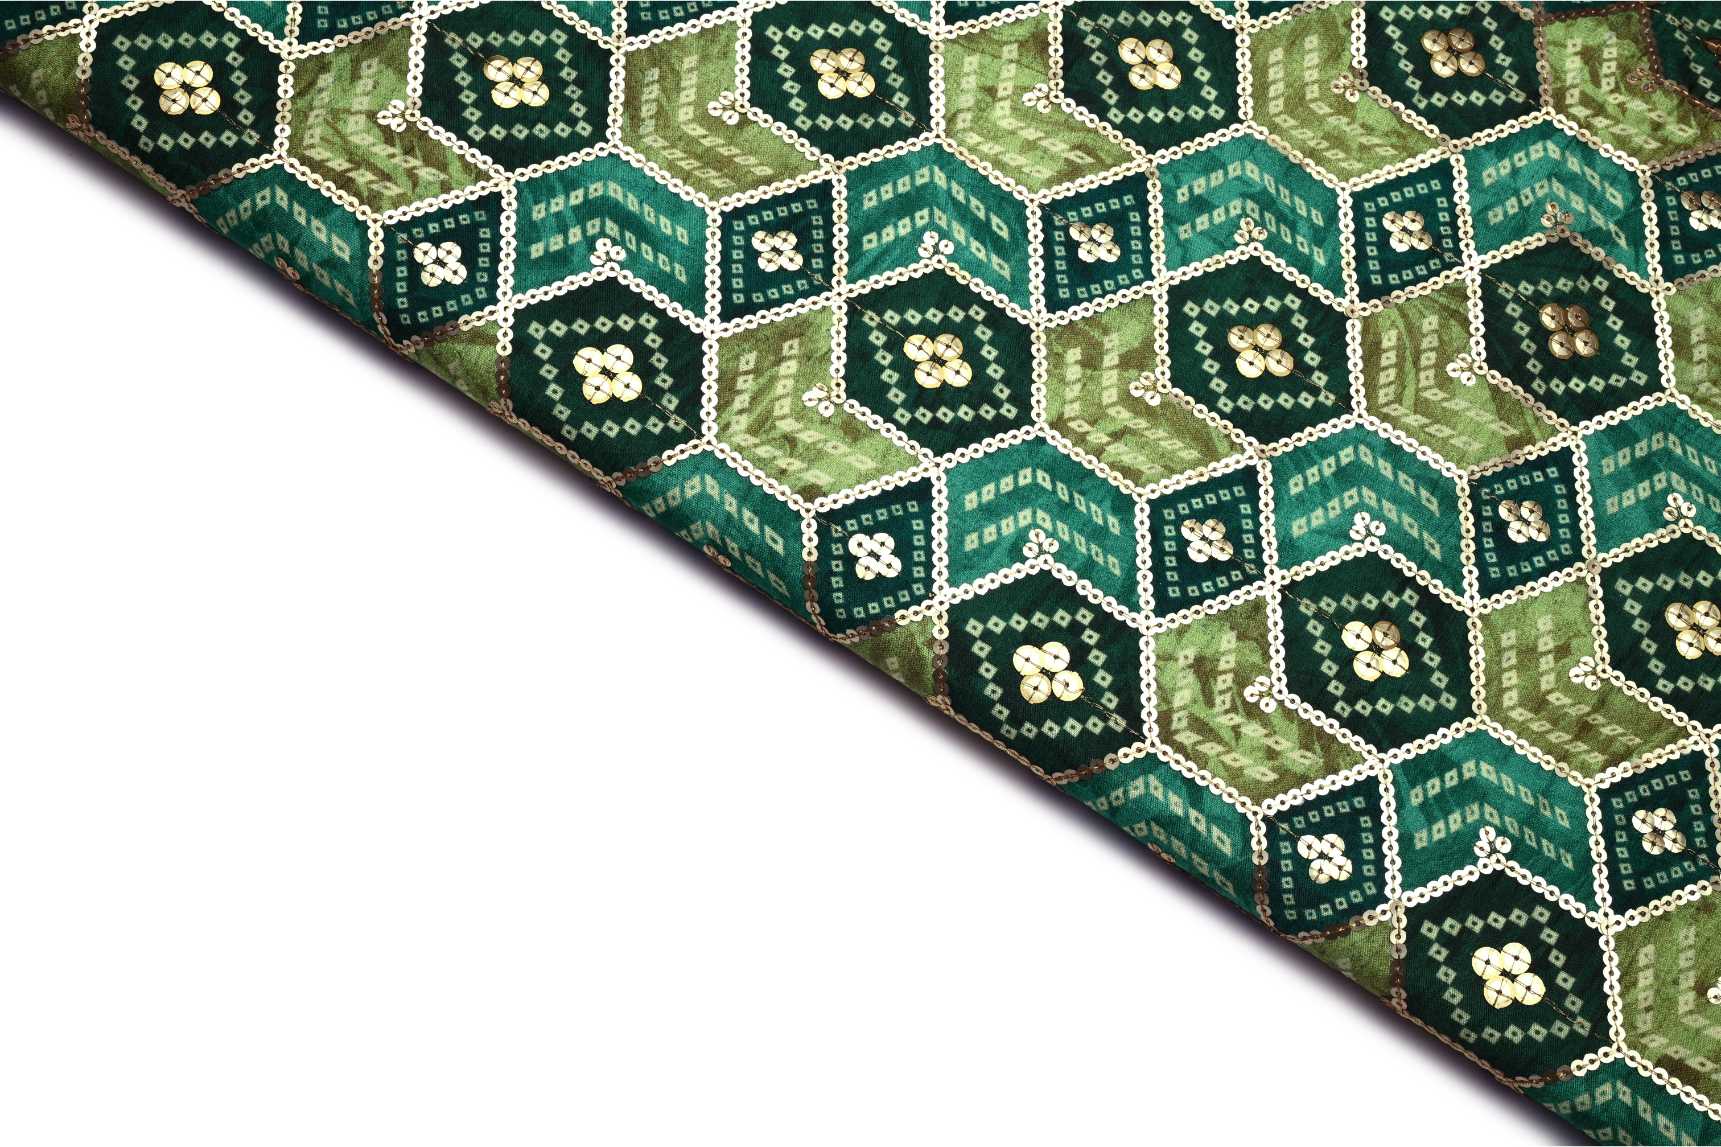 BRIGHT EMARALD GREEN COLOR WISCOSS DOLA SILK GEOMETRIC DIGITAL BANDHNI & GOLD SEQUANCE CHAIN PATTERN EMBROIDERED WORK FABRIC 11729